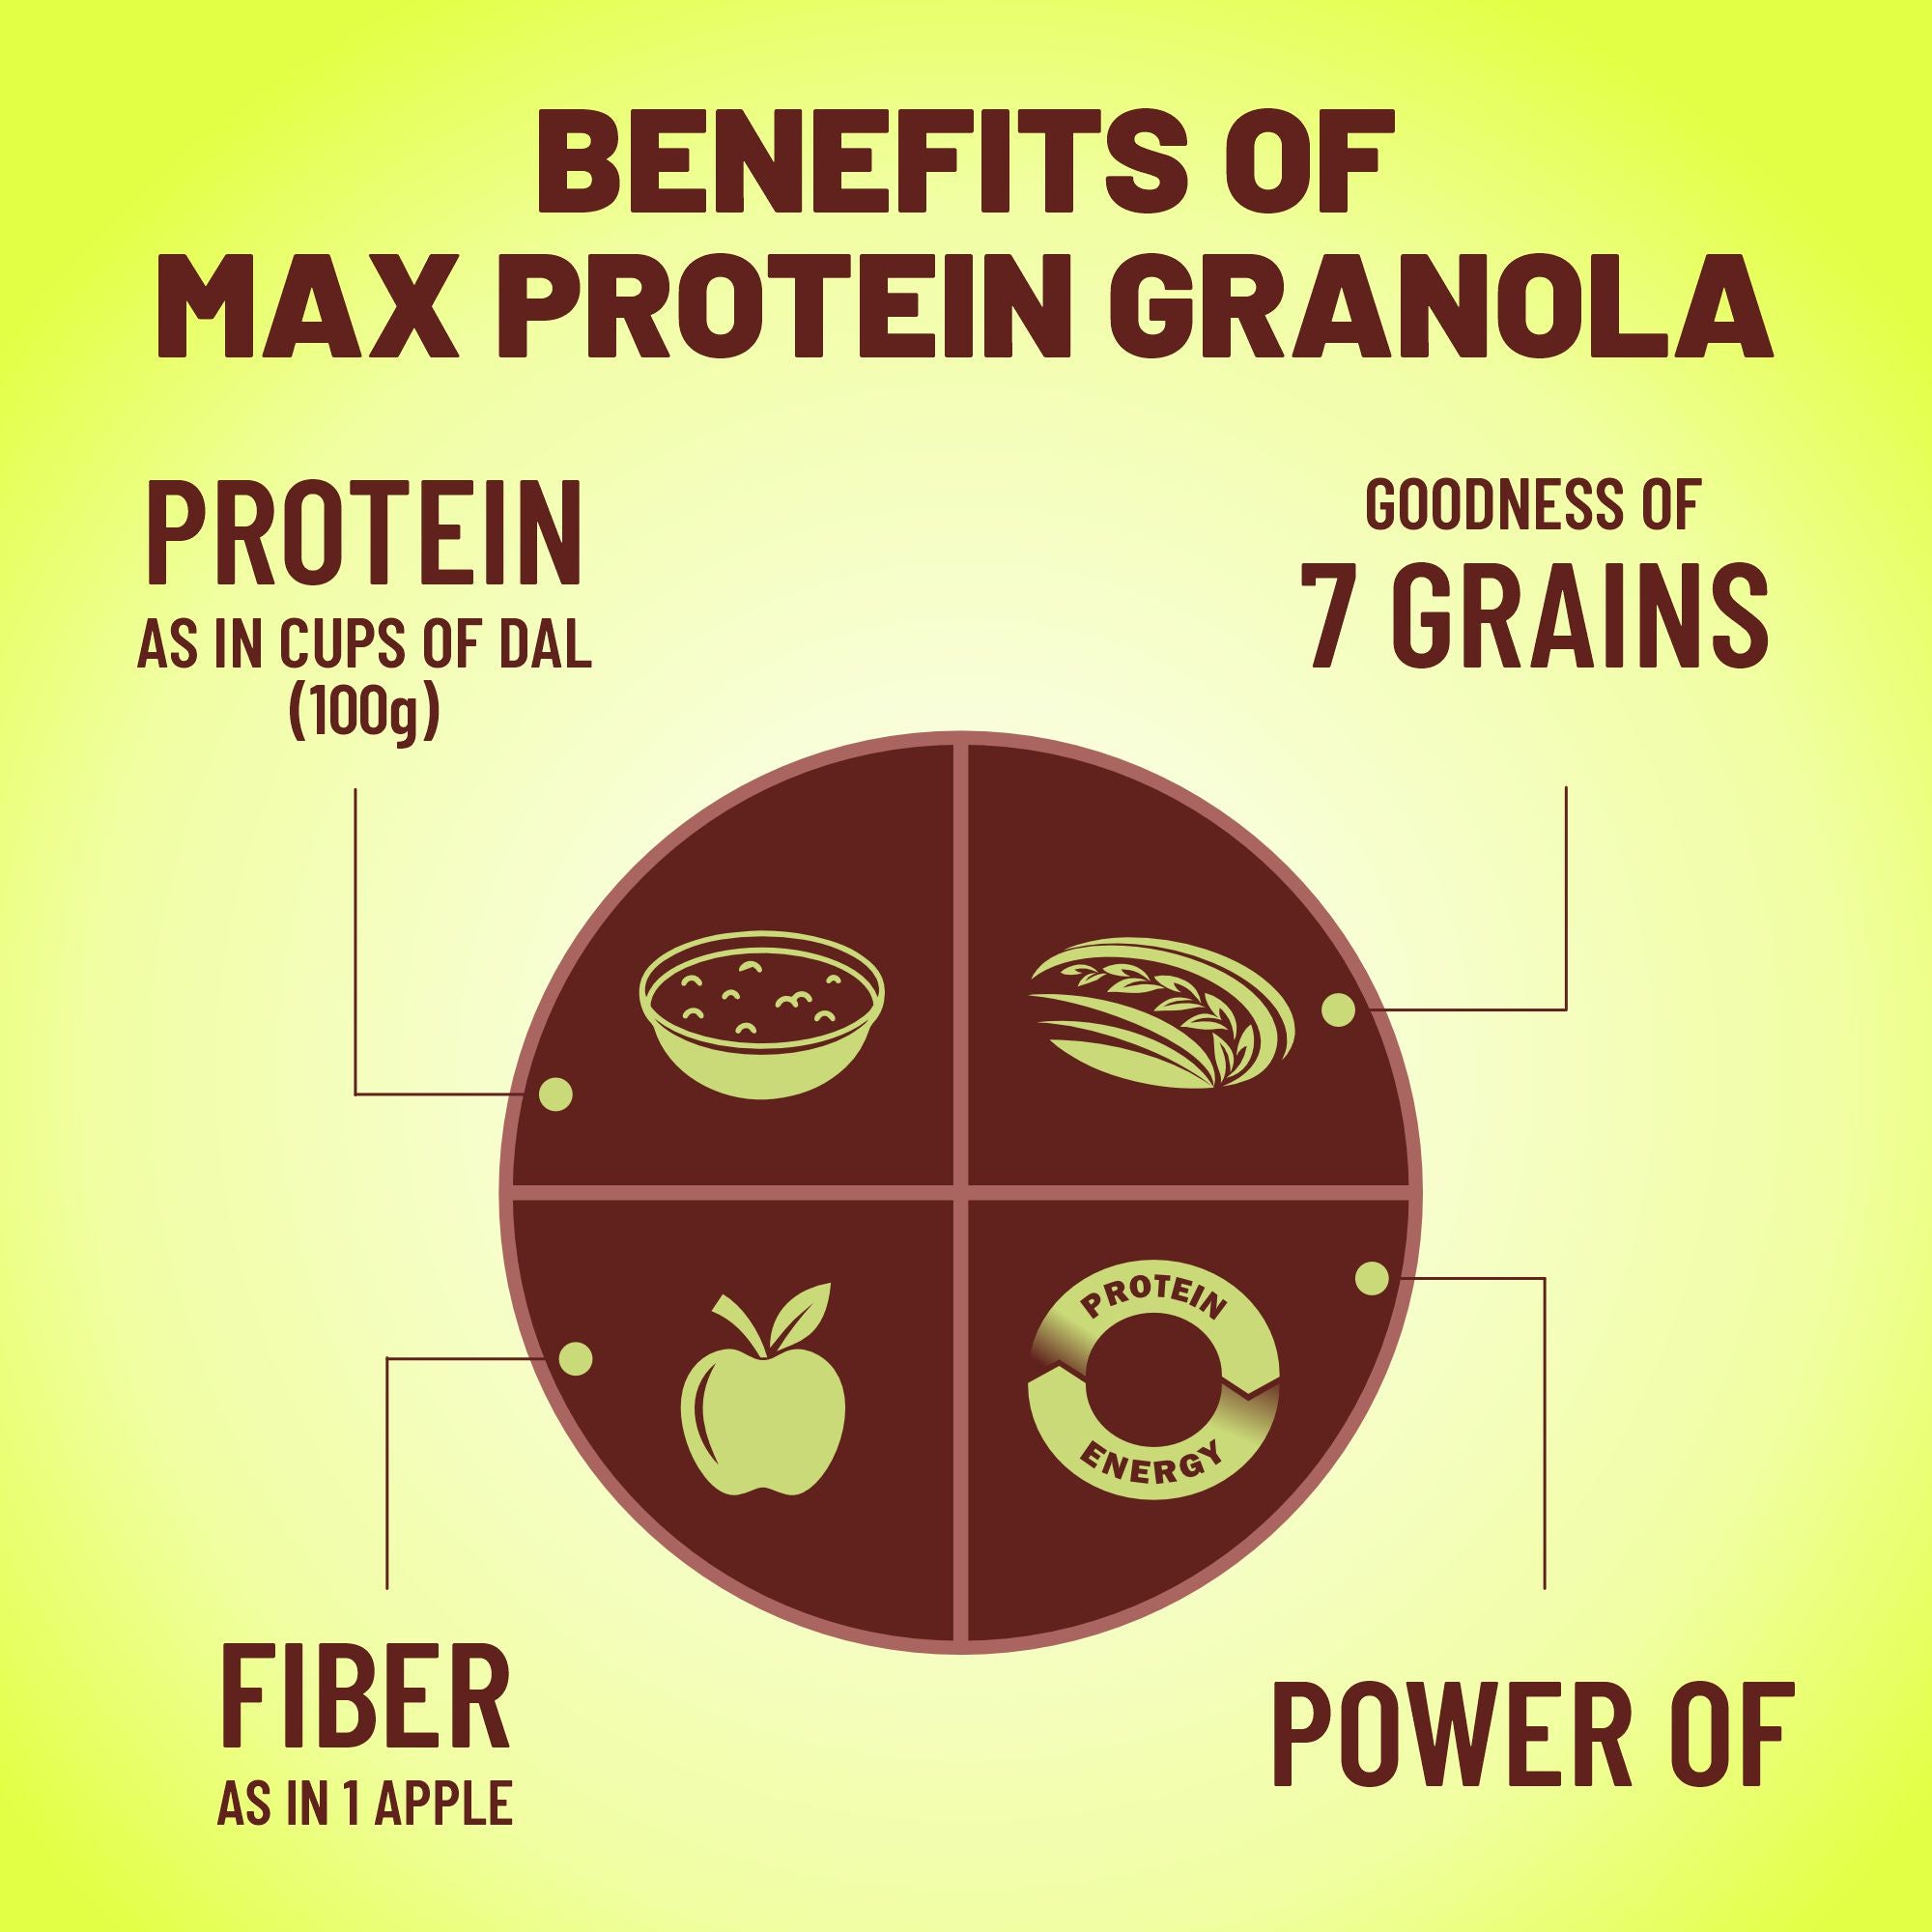 Max Protein Granola - Fruits & Nuts - 500g